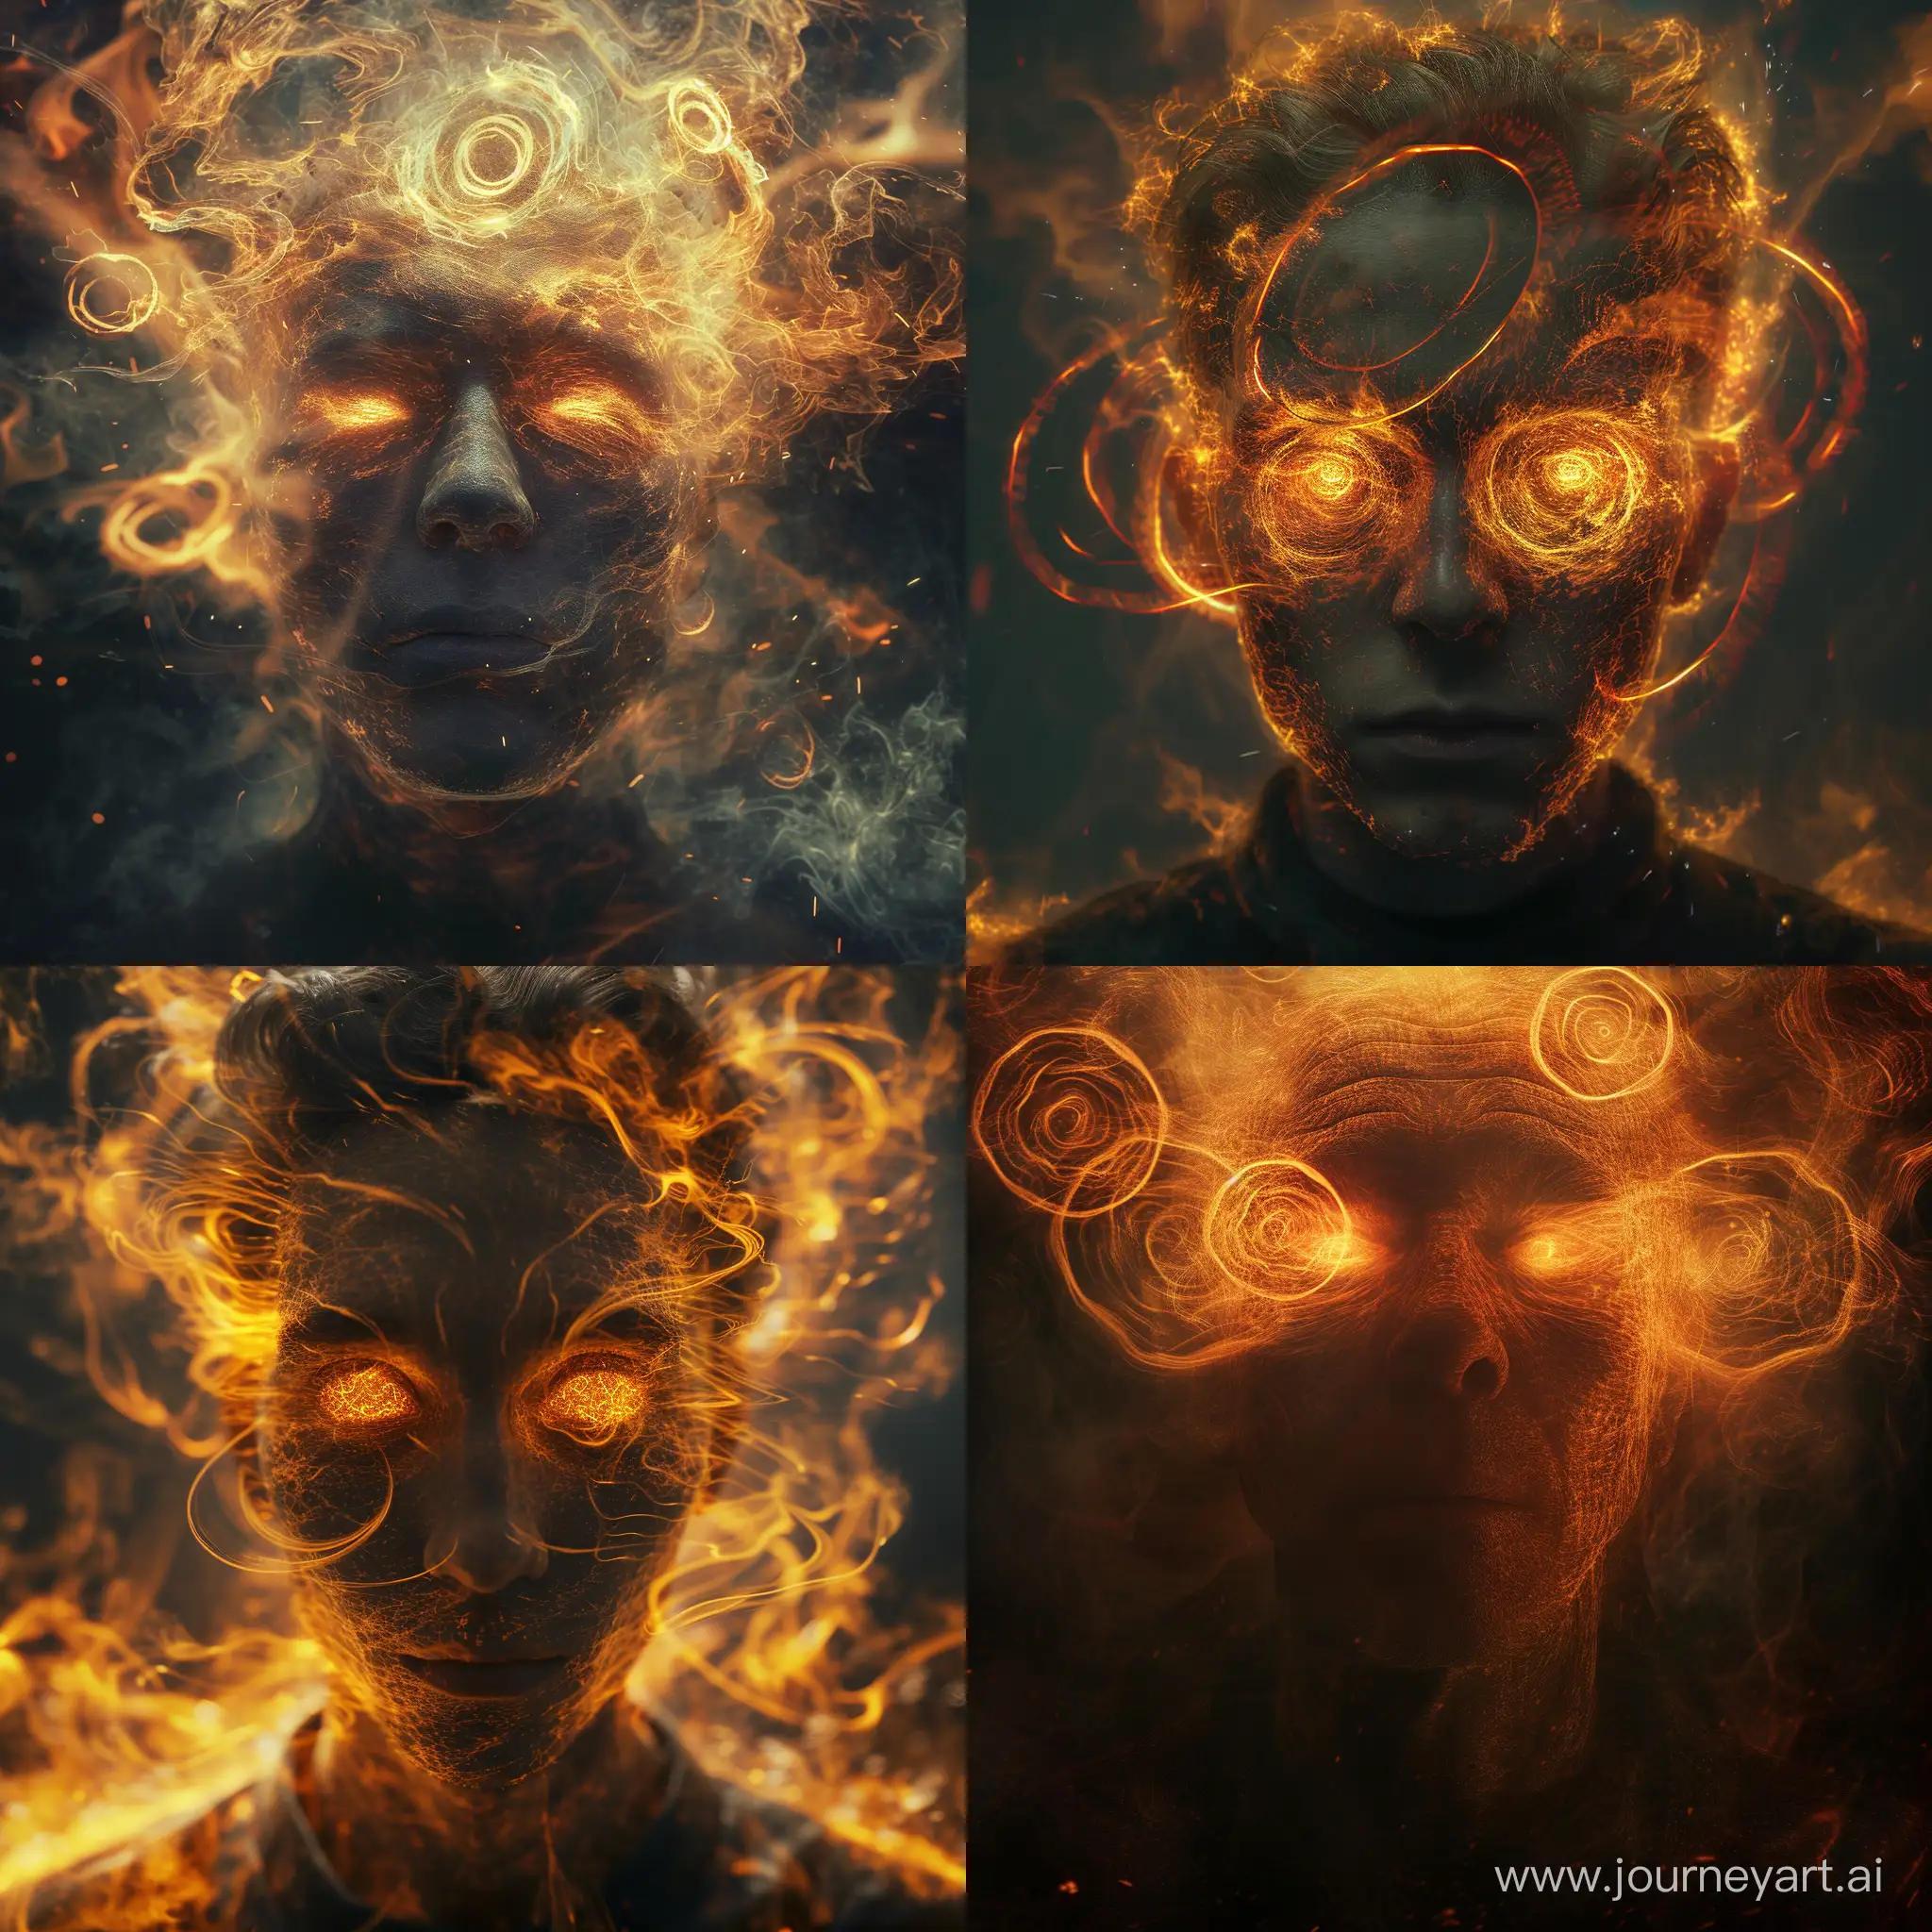 Intense-Traveler-with-Fiery-Eyes-Amid-Distorted-Heat-Waves